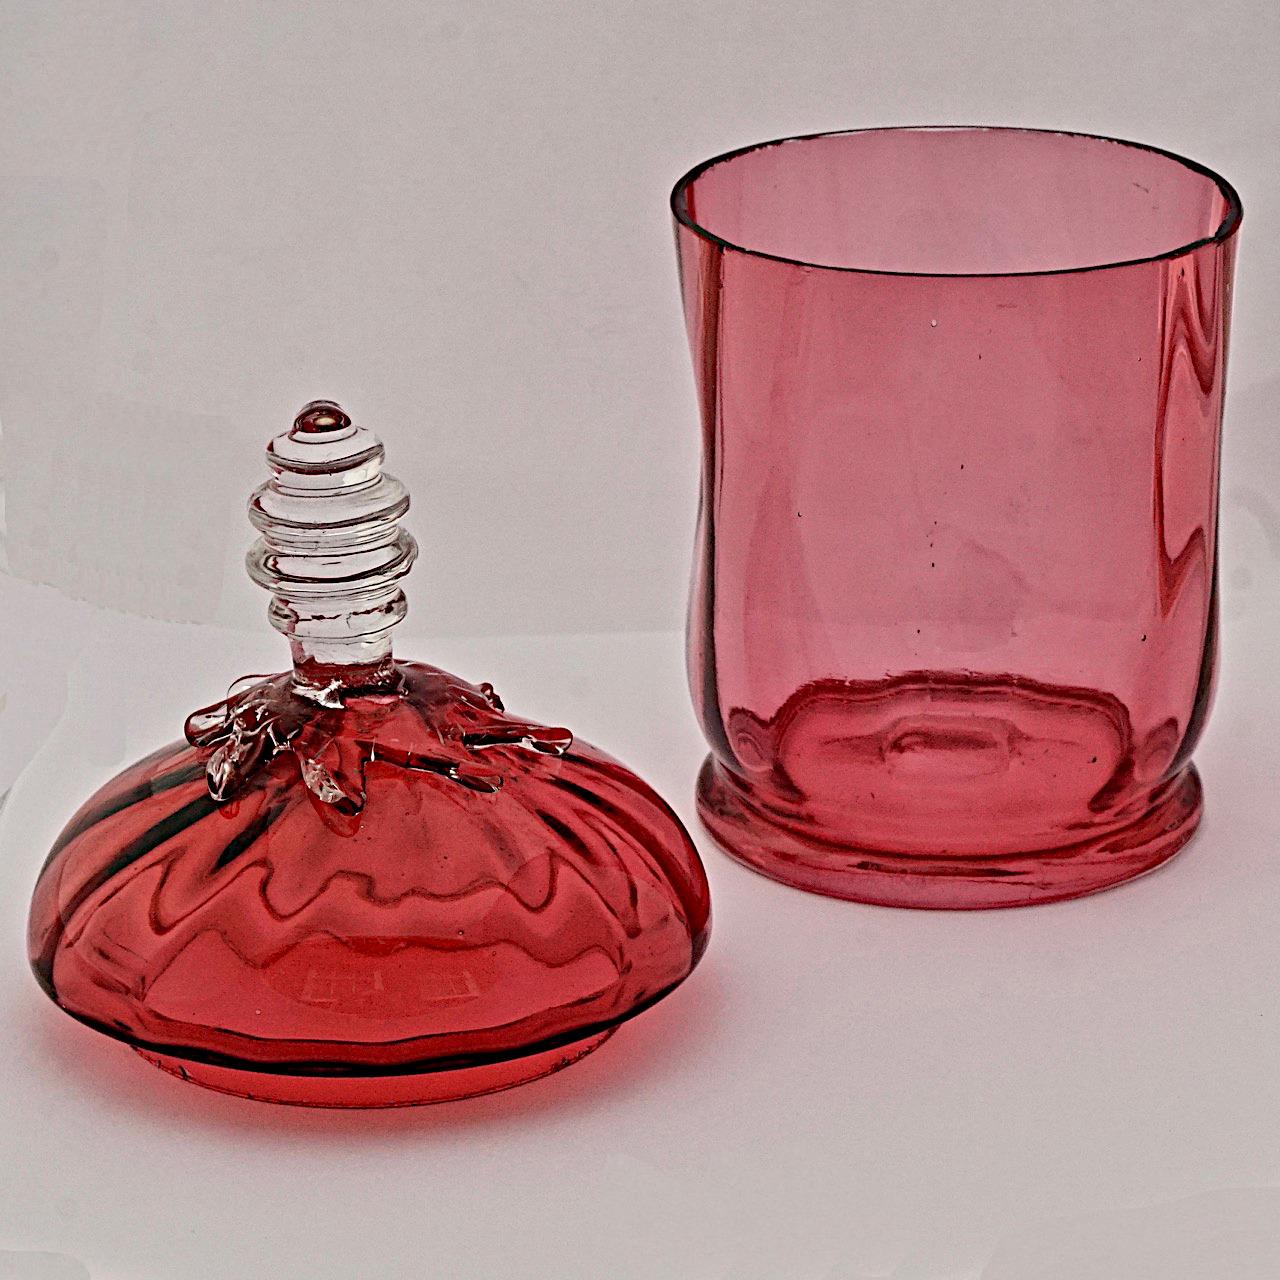 Wonderful antique Victorian handmade cranberry glass jar, with an applied clear glass top. Measuring height approximately 17 cm / 6.7 inches, and the base is diameter 7.8 cm / 3 inches. There is a pontil mark. The jar has some chips to the